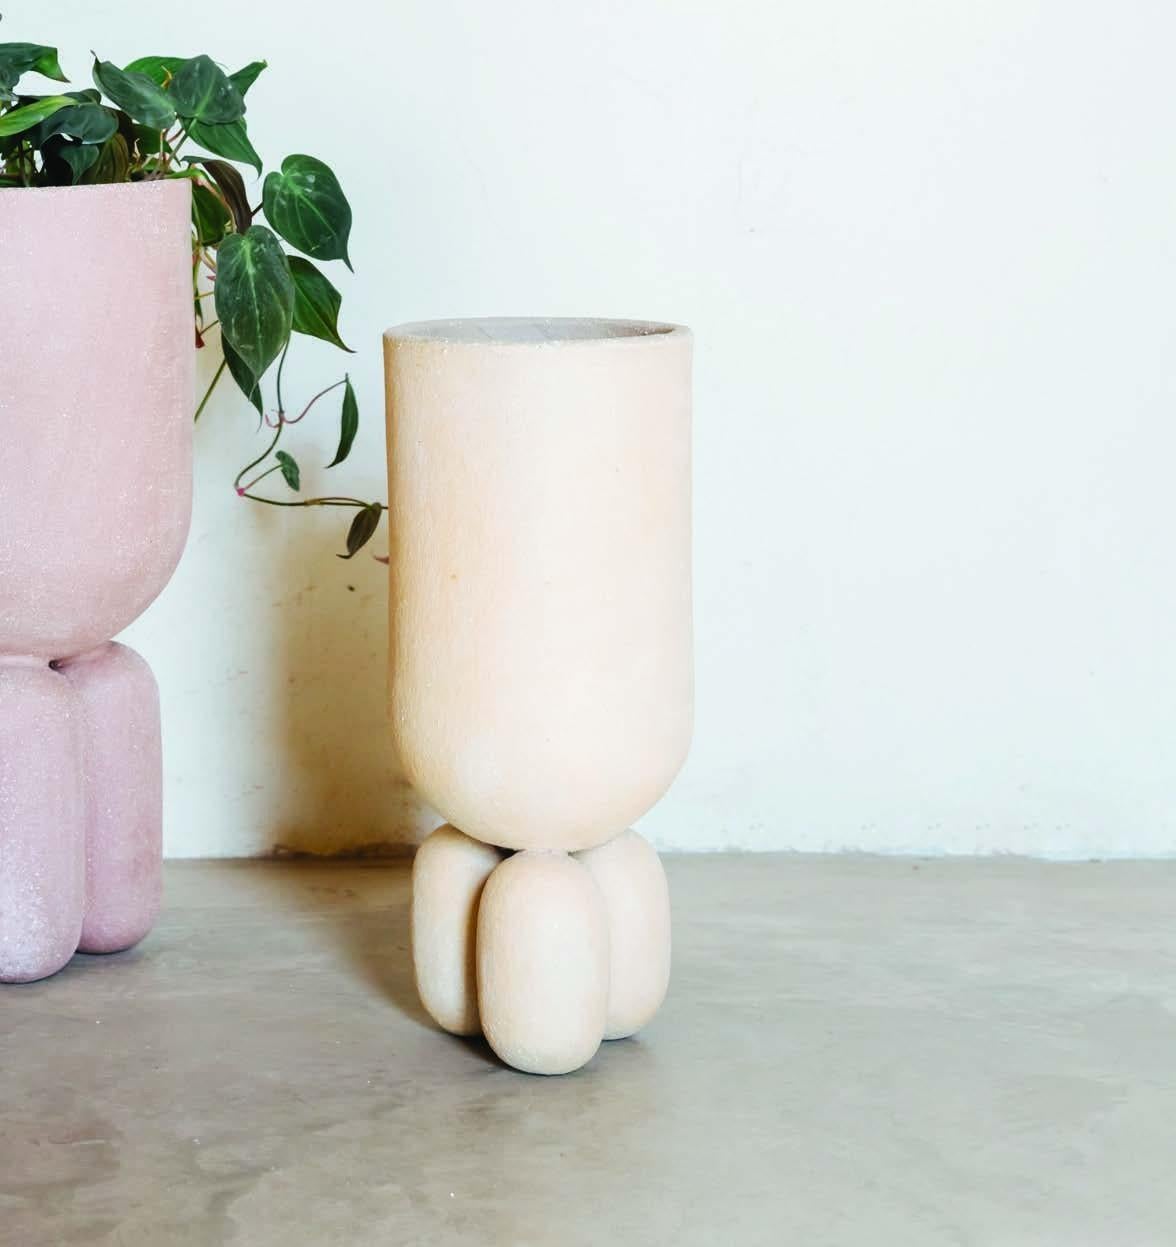 Planter flat feet 15 by Lisa Allegra
Dimensions: ø 15 x 37 cm
Materials: Clay
Variations available.

Born in 1986 in Paris, Lisa Allegra has earned in 2010 a degree in furniture design from the École Supérieure des Arts Décoratifs. She has